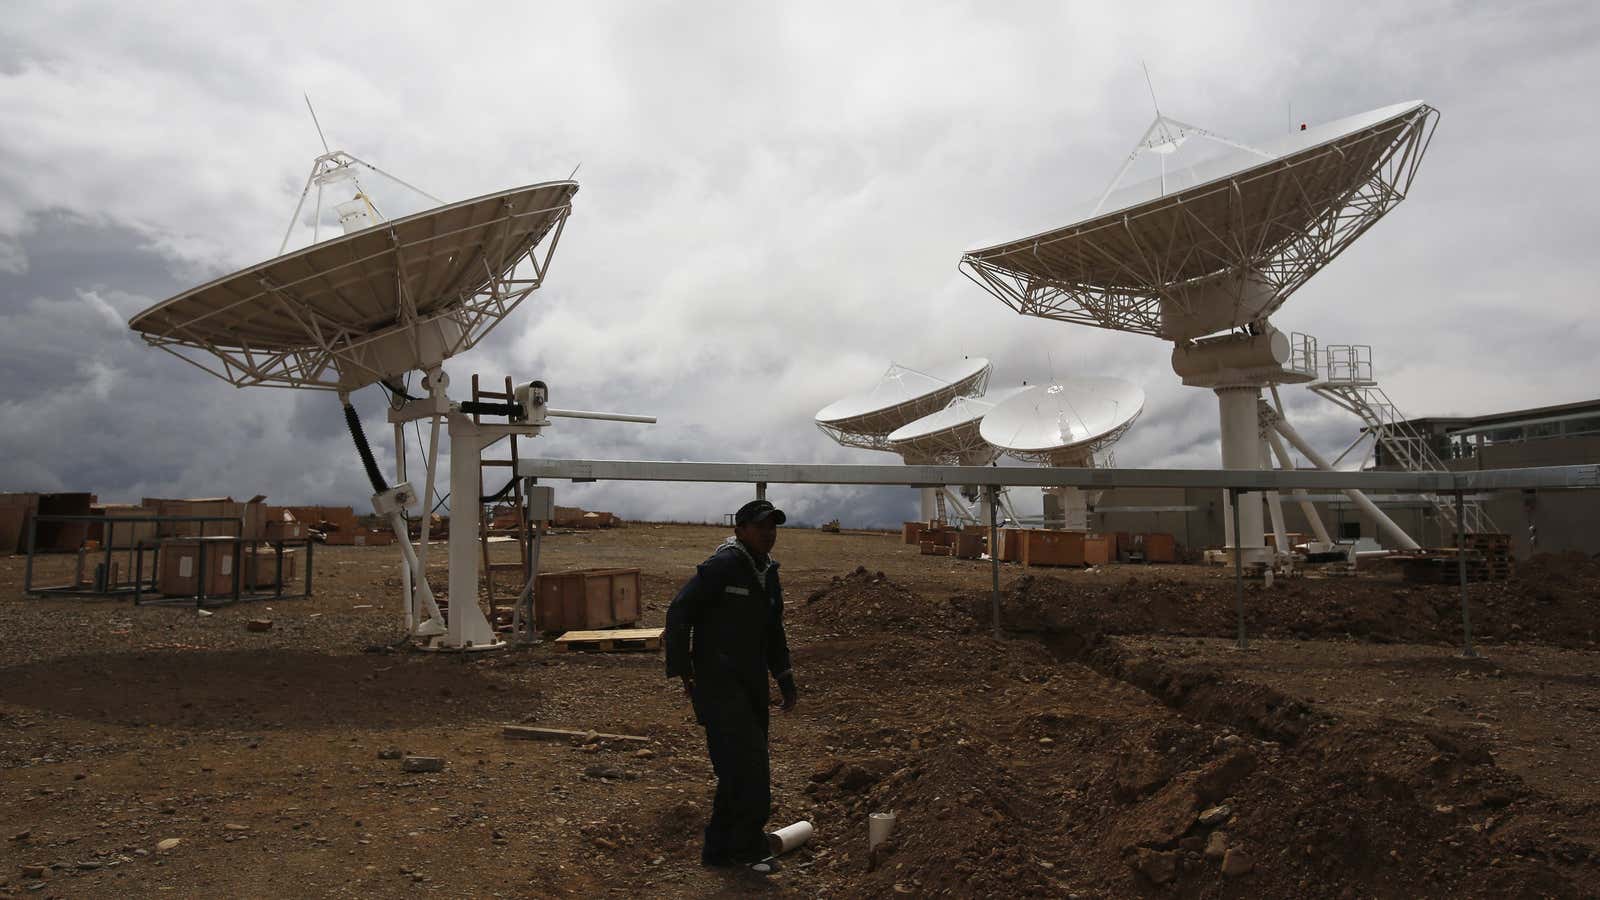 Latin America wants a space agency of its own.